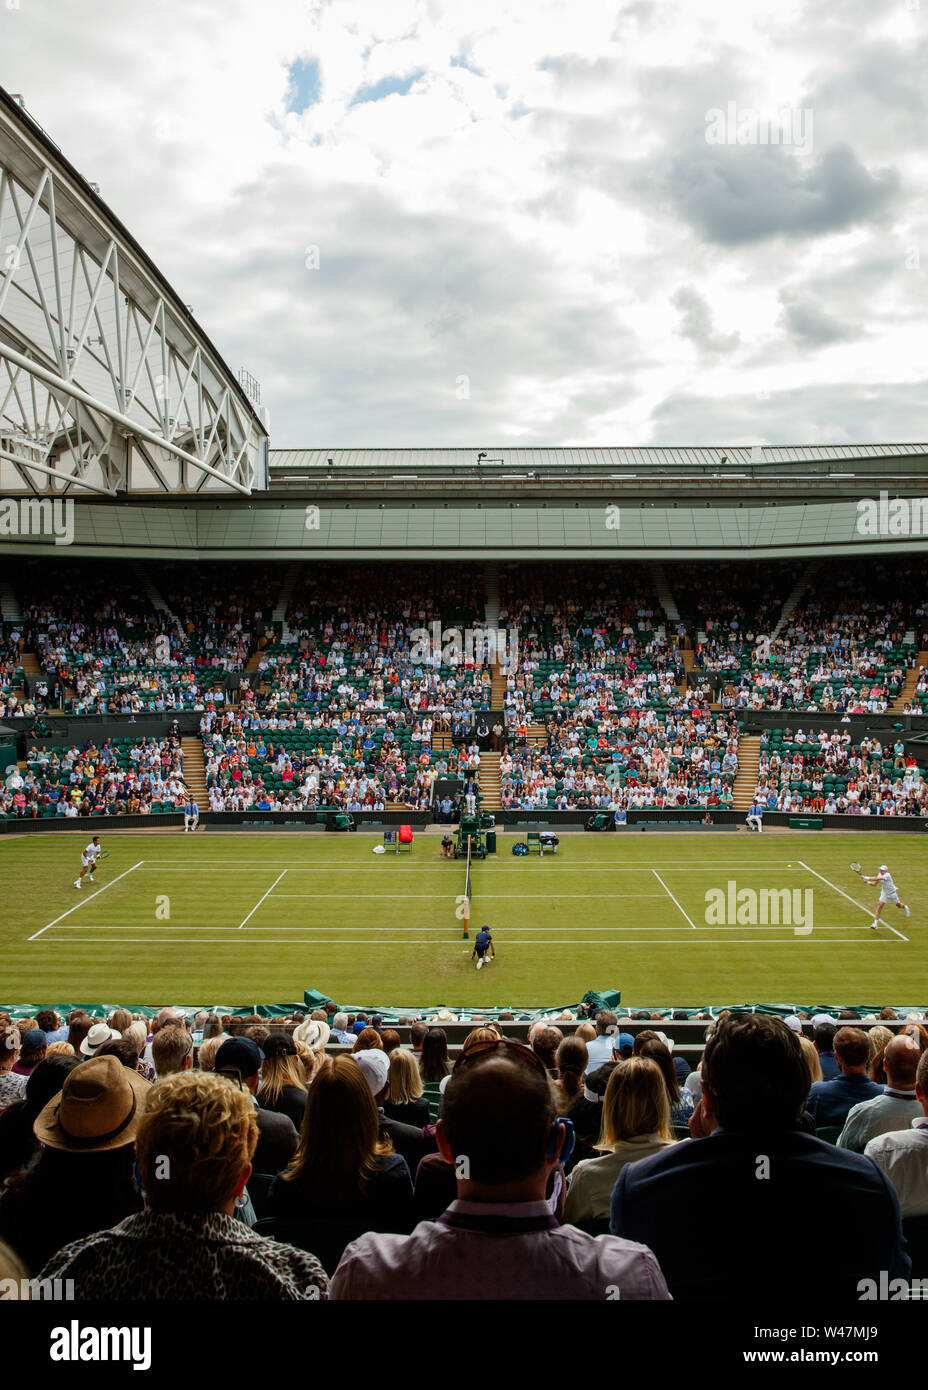 General View of Kyle Edmund and Jaume Munar on Centre Court at The Wimbledon Championships 2019. Held at The All England Lawn Tennis Club, Wimbledon. Stock Photo